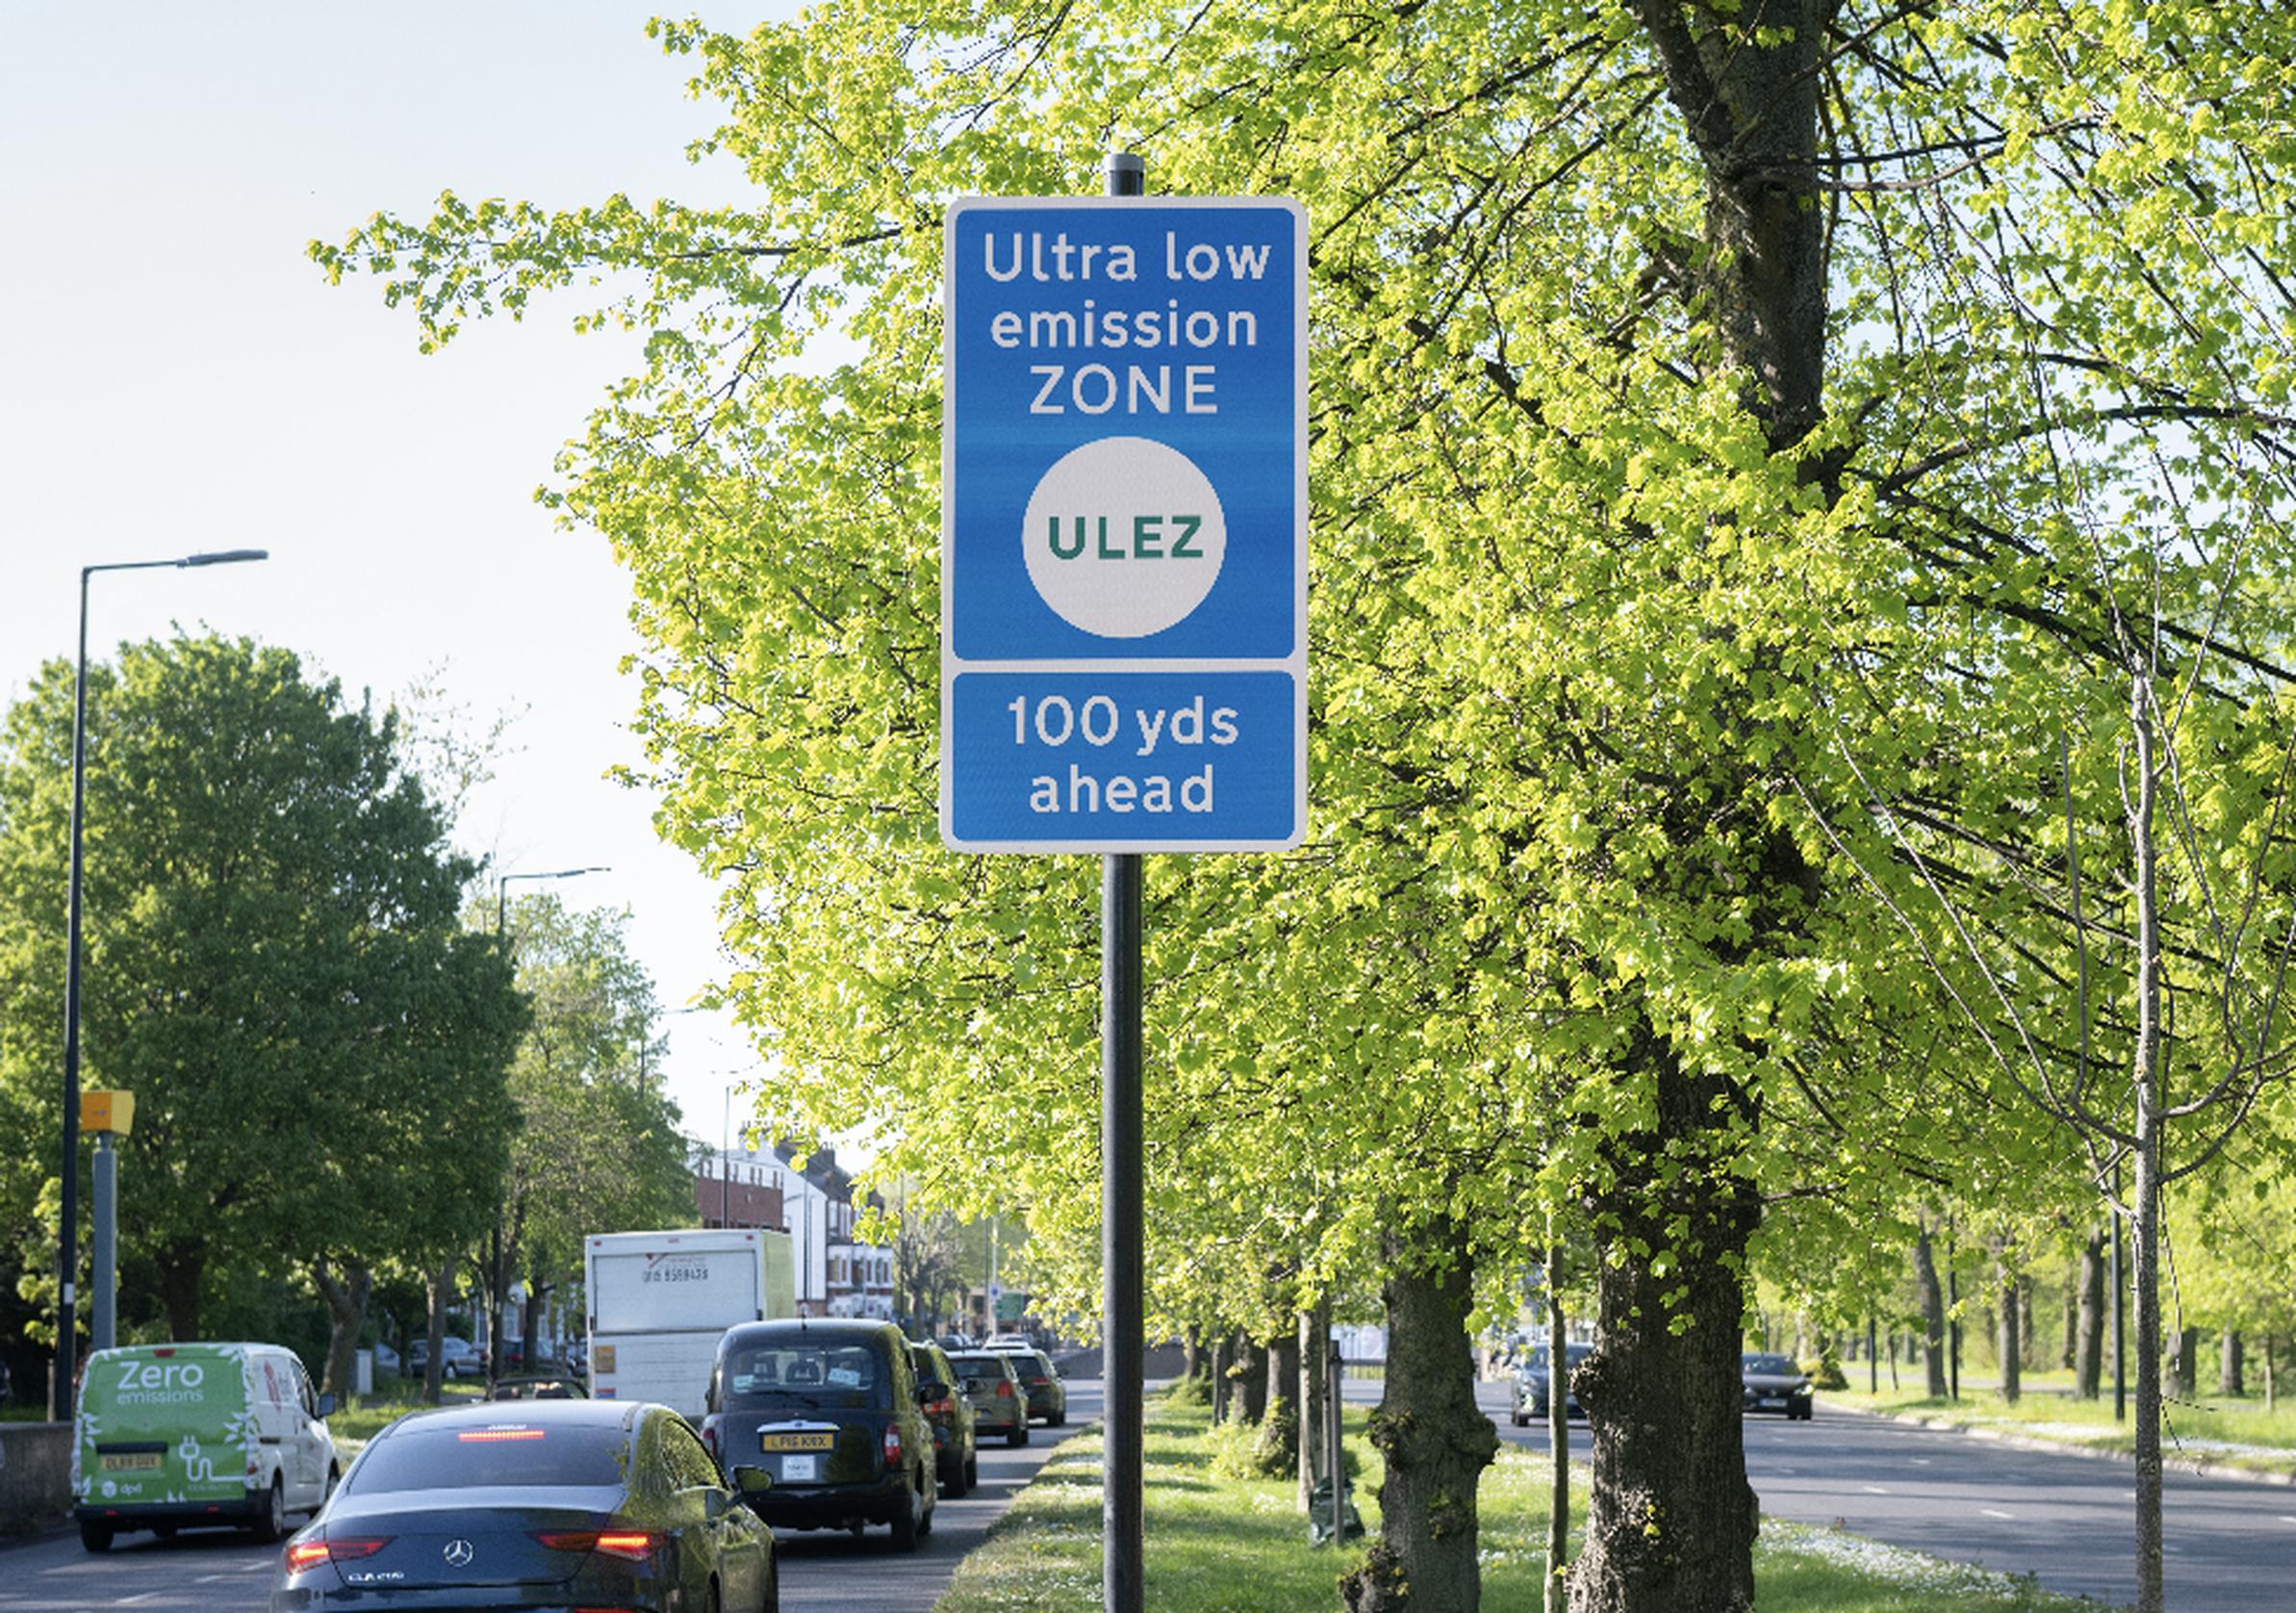 A consultation on the plans to expand the ULEZ runs until 29 July 2022